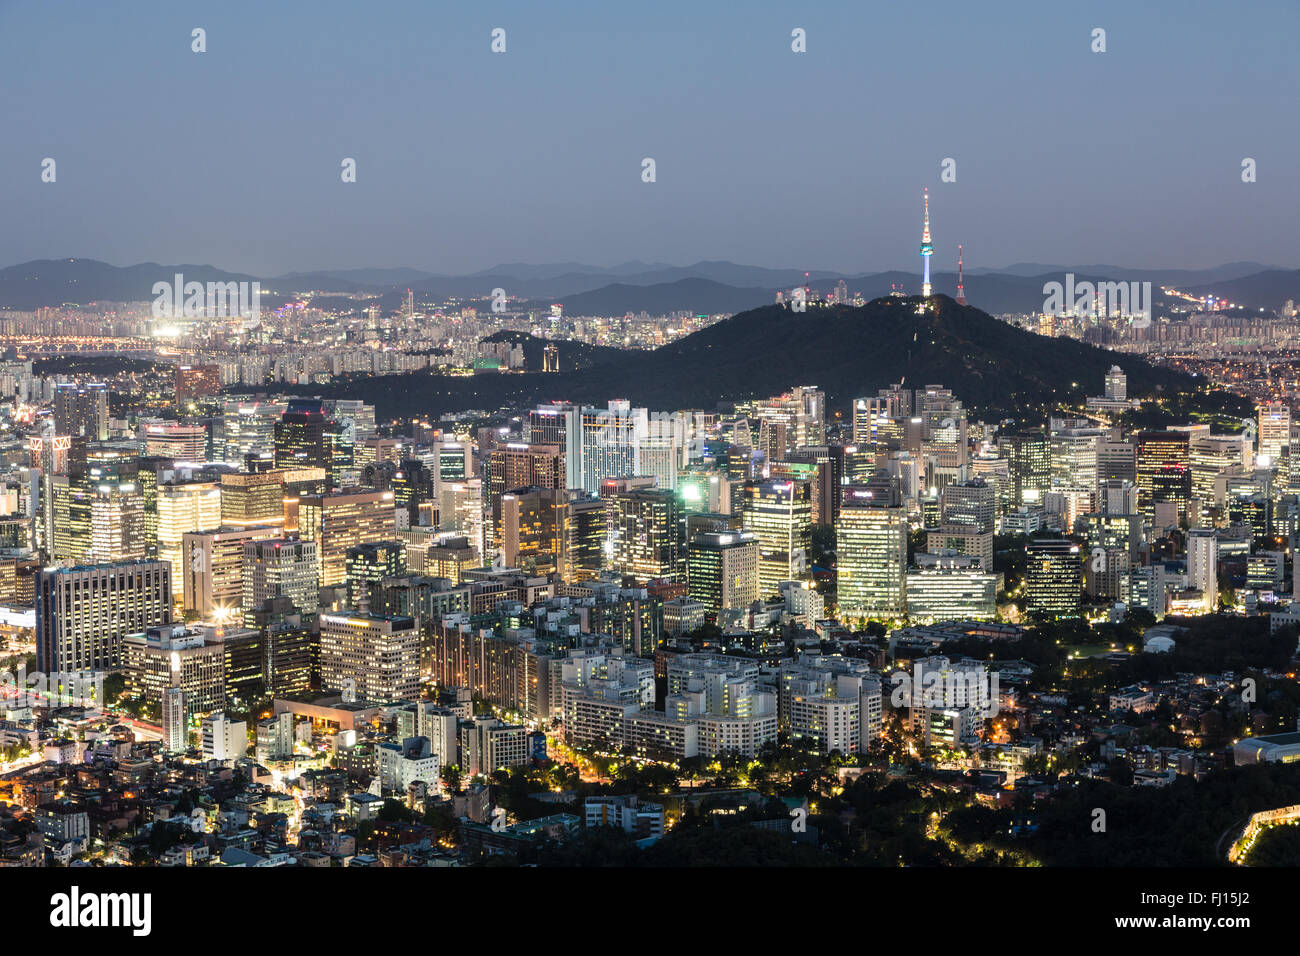 An aerial view of Seoul business district at night with the Namsan mountain. Seoul is South Korea capital city. Stock Photo